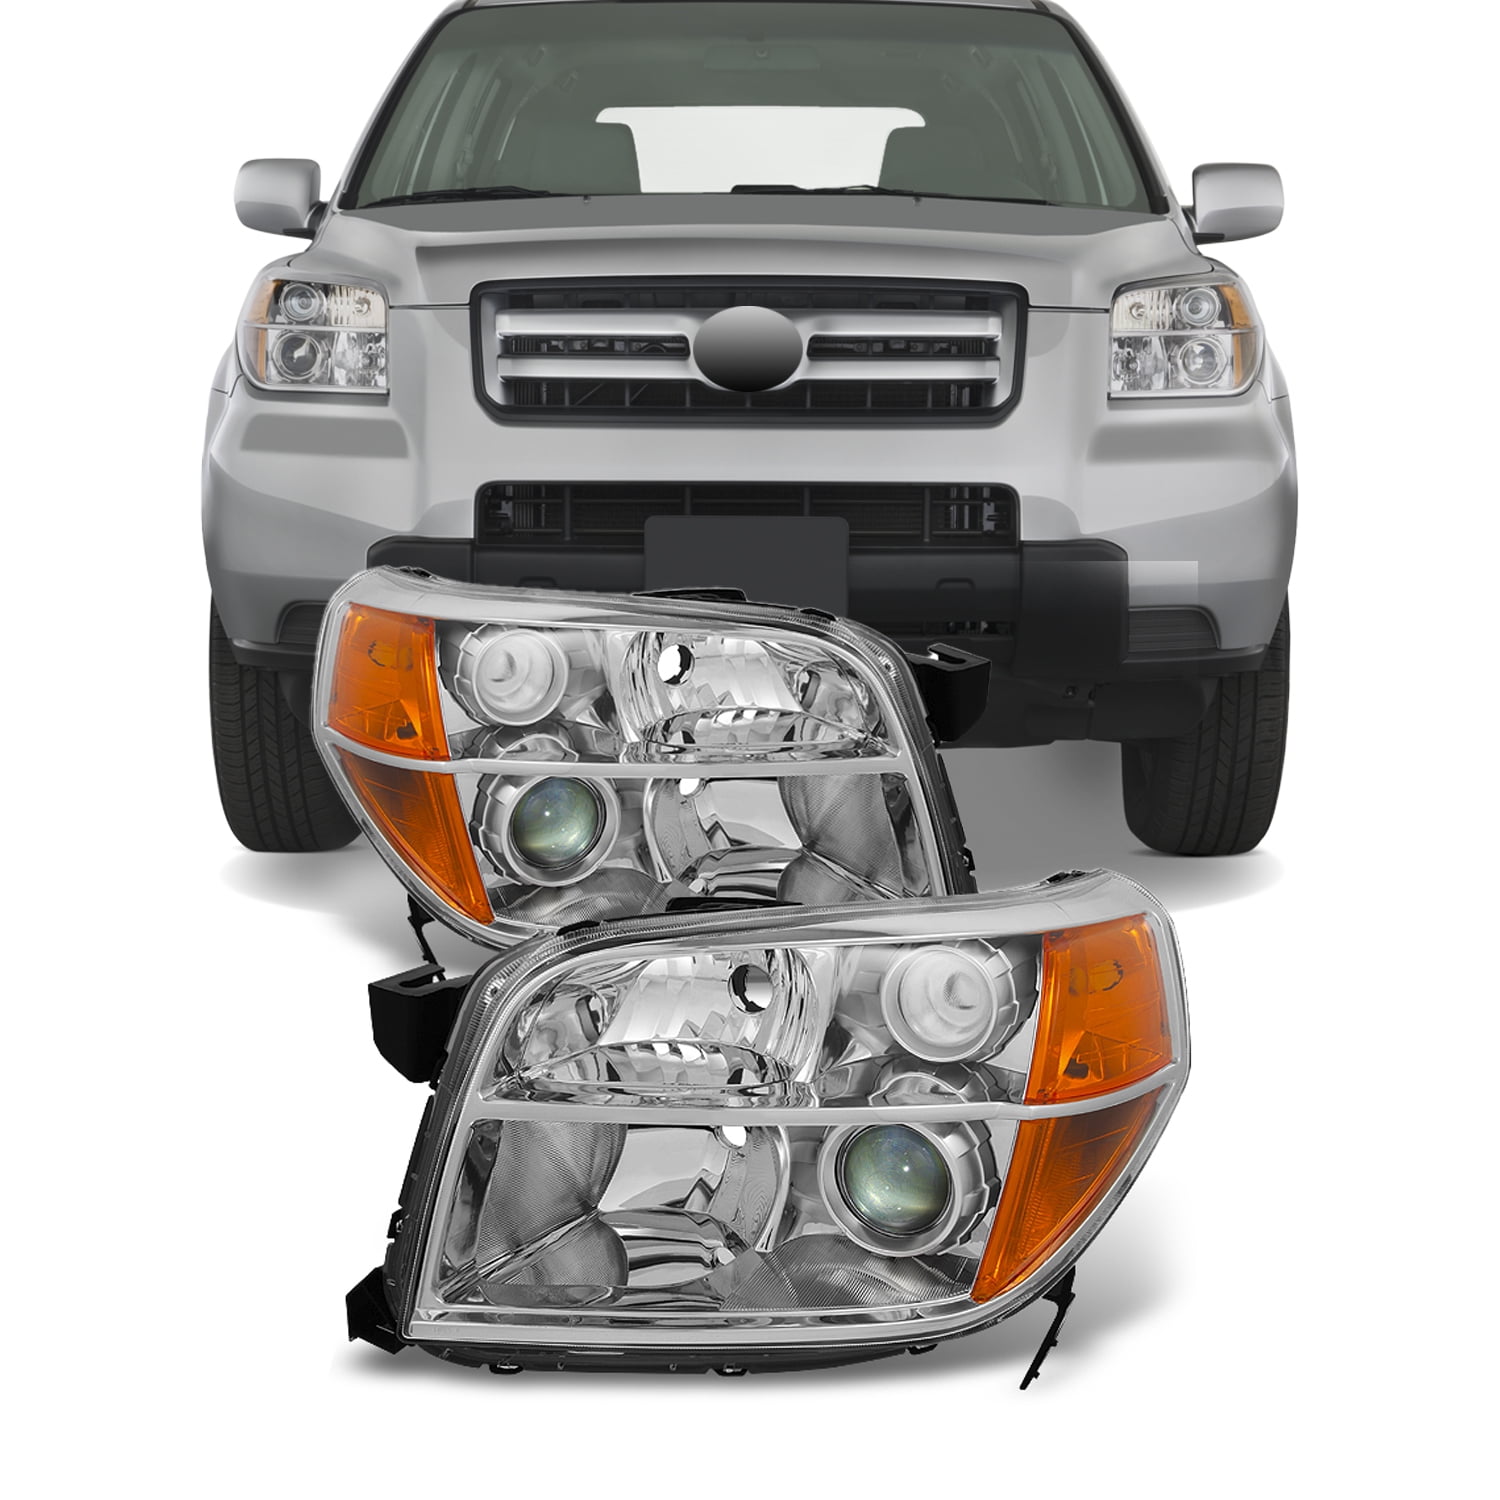 Partslink HO2518108 Multiple Manufacturers HO2518108N OE Replacement Headlight Assembly HONDA ODYSSEY 2005-2007 